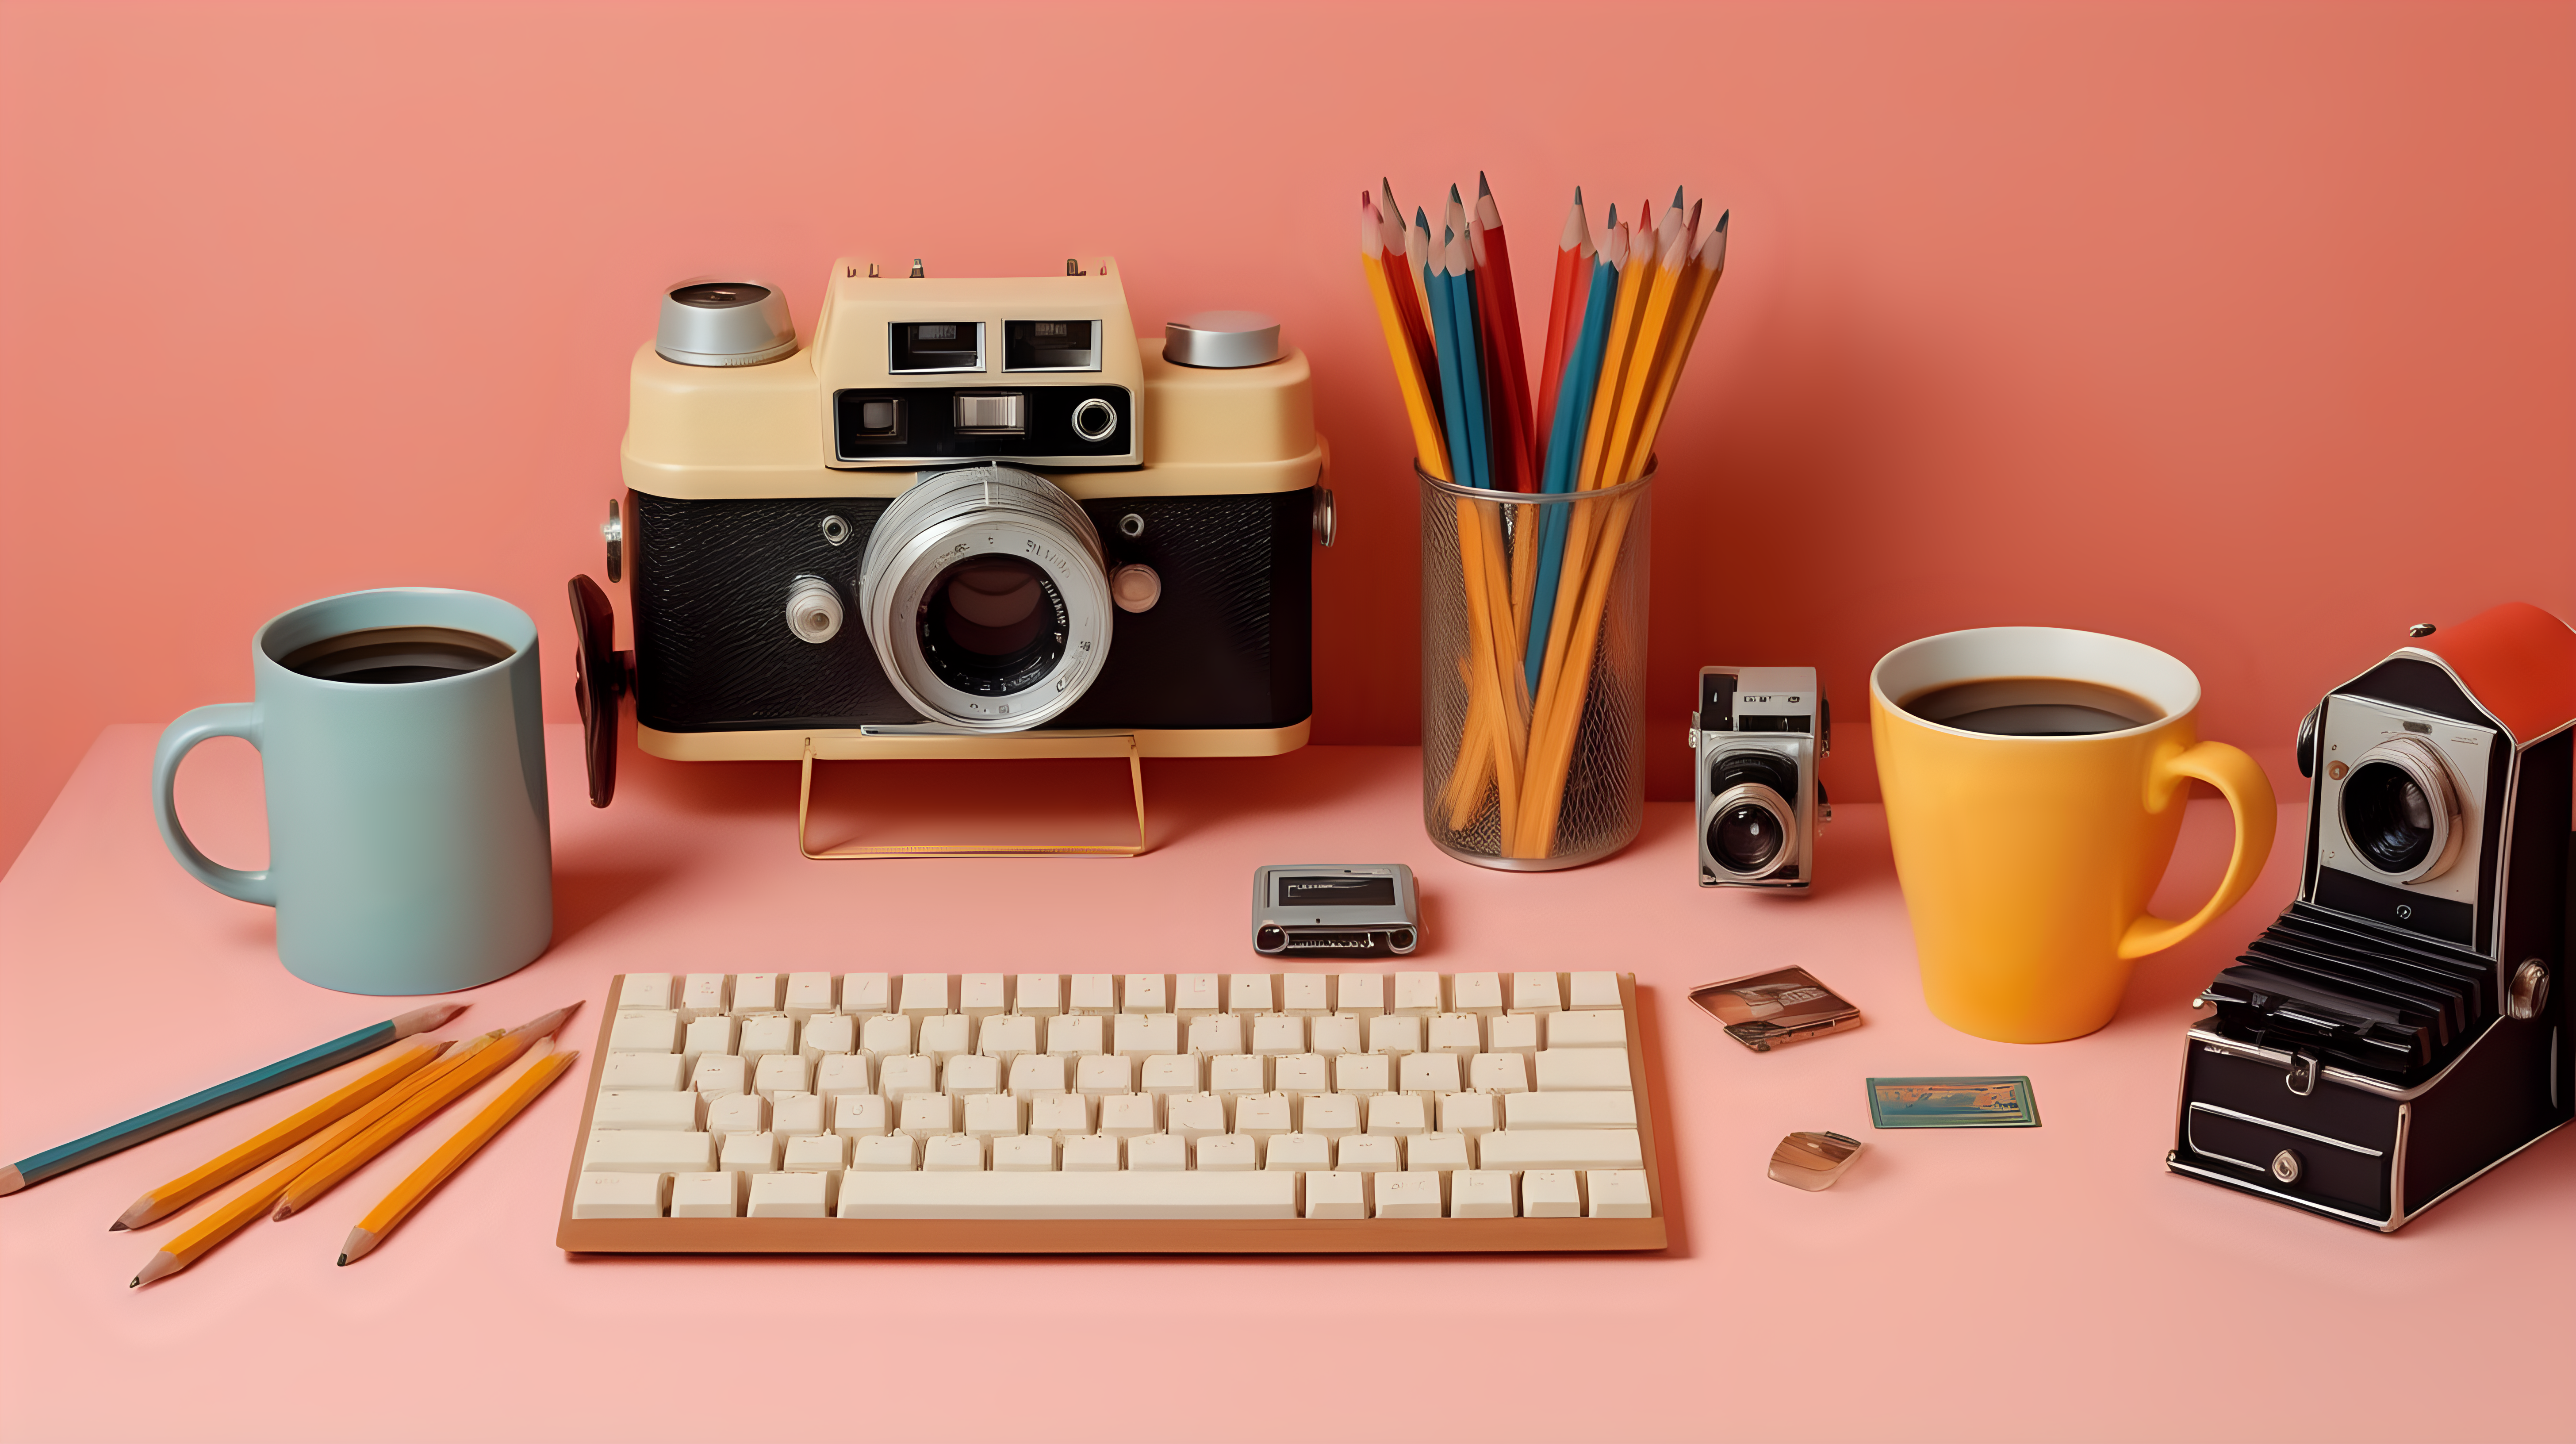 Desktop with coffee cup, pencils, keyboard and a film camera in the style of a wes anderson film